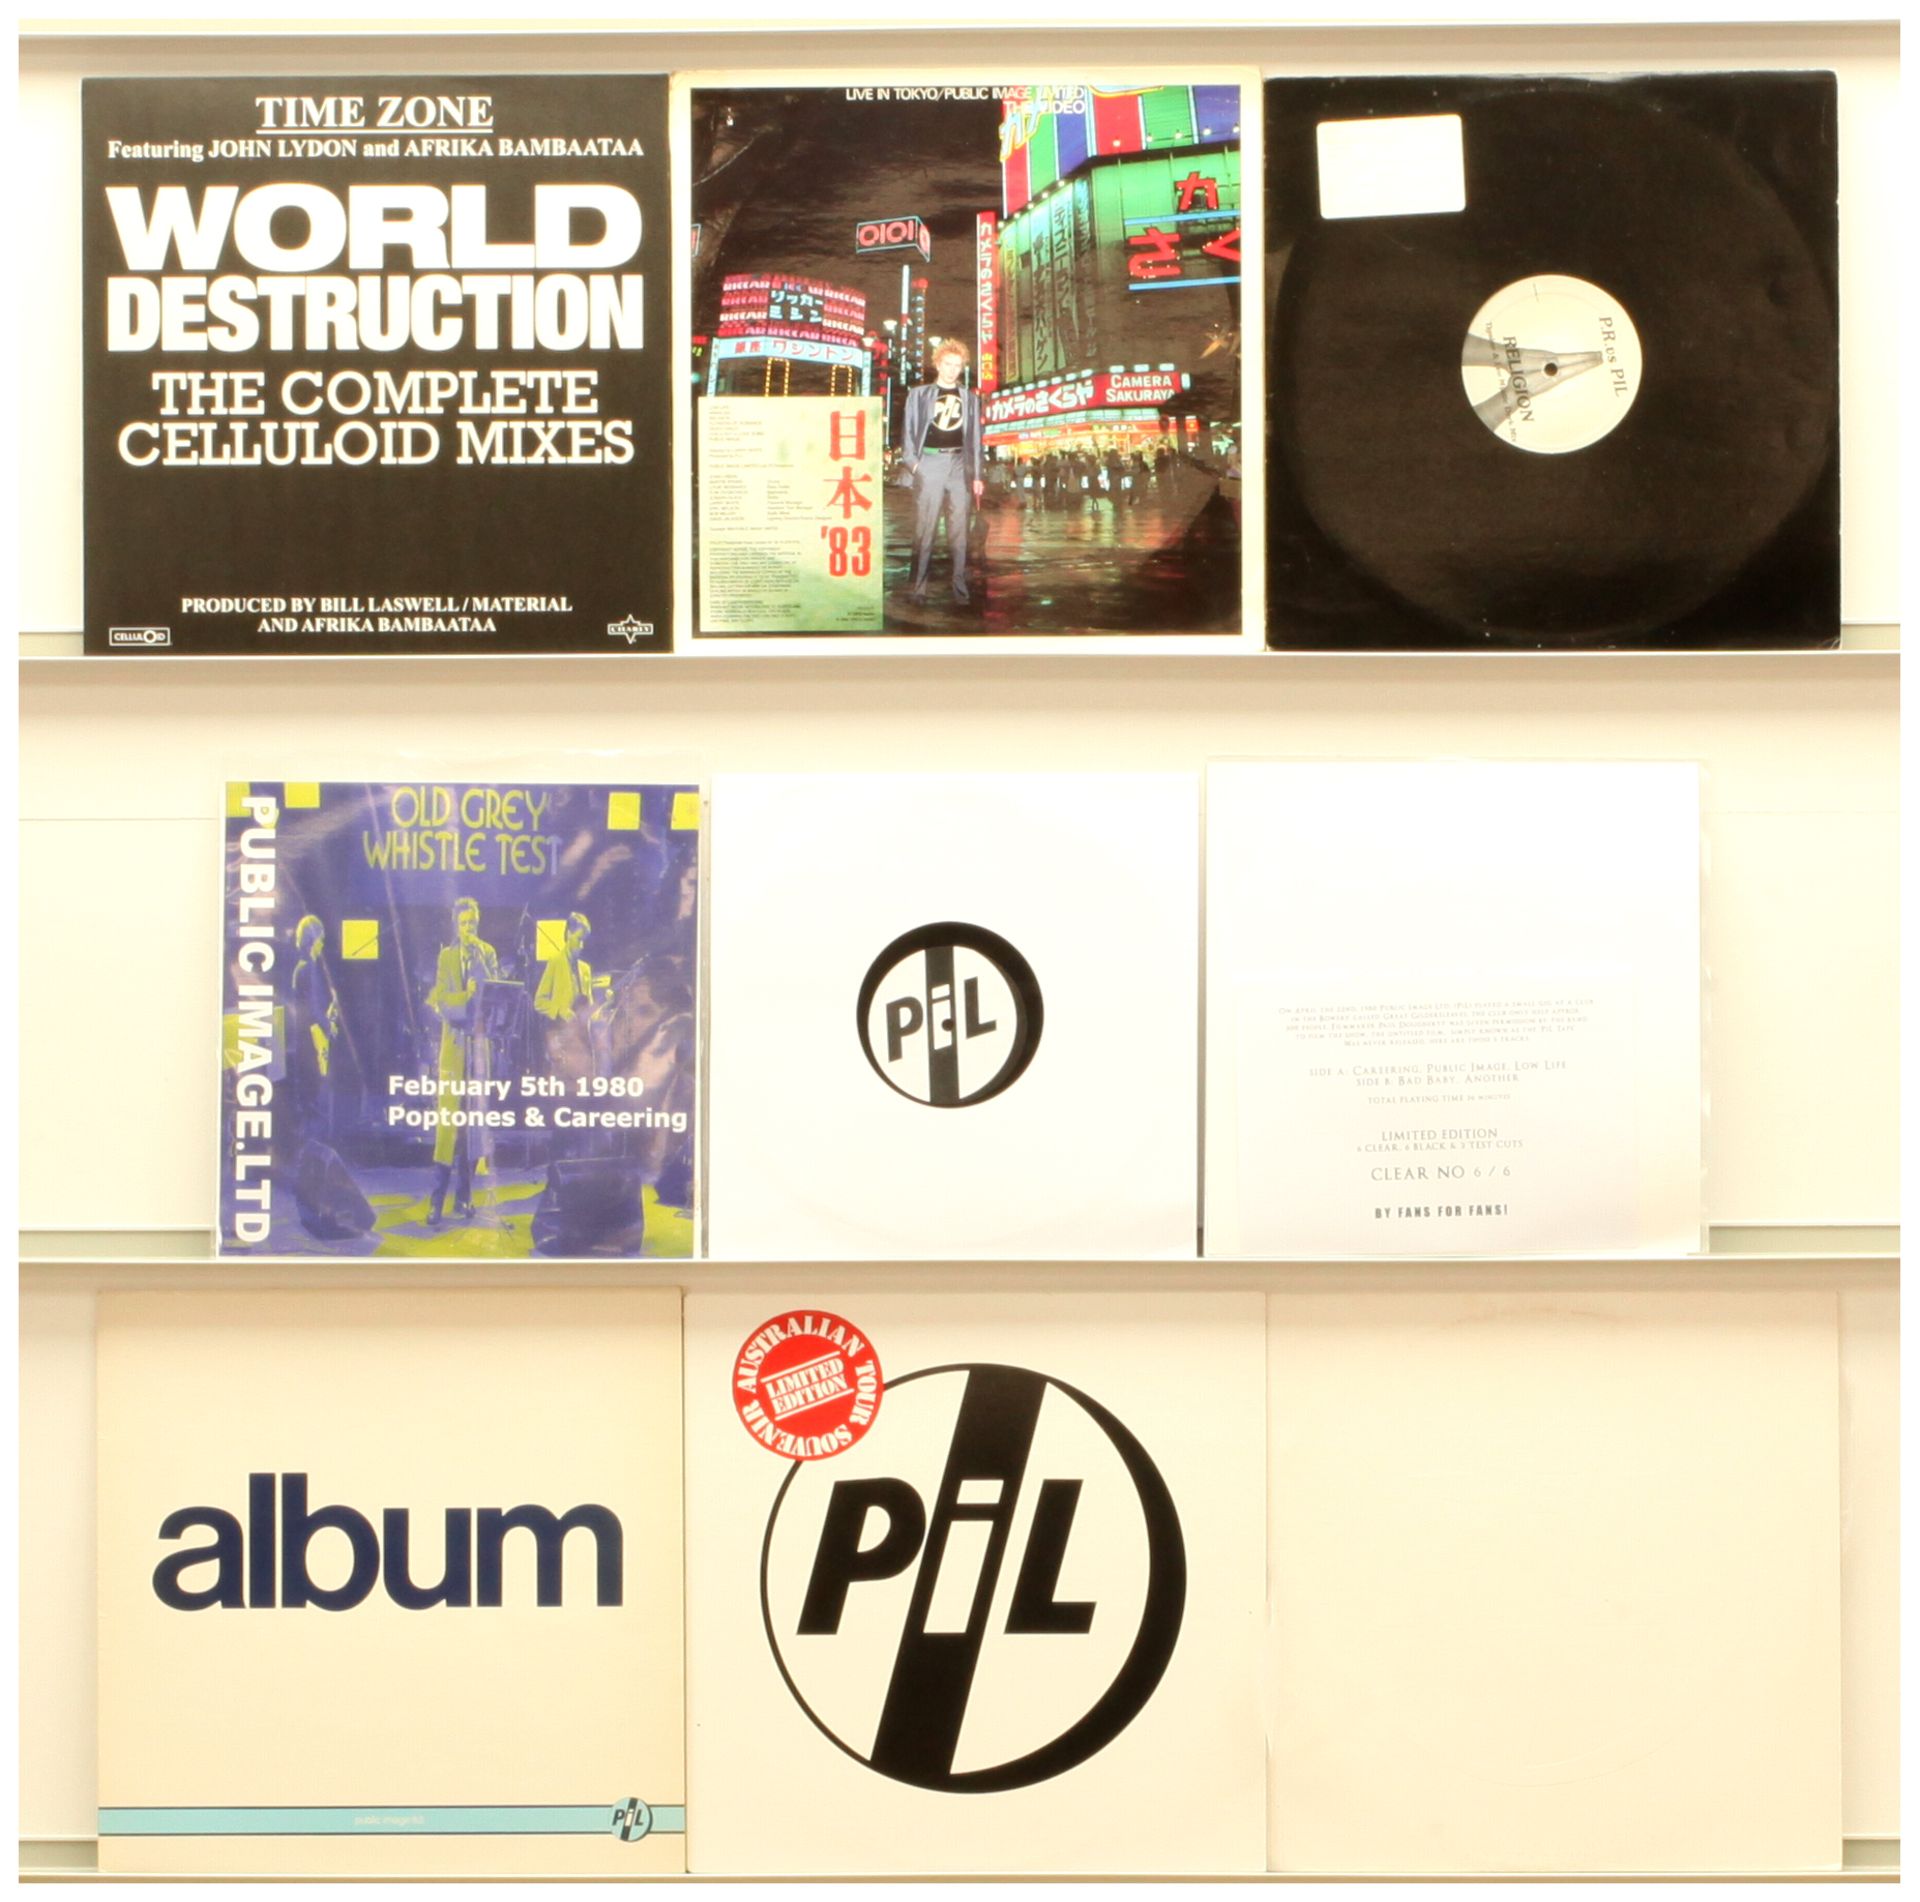 Public Image Limited Assorted LPs, 12" amd 10" Singles